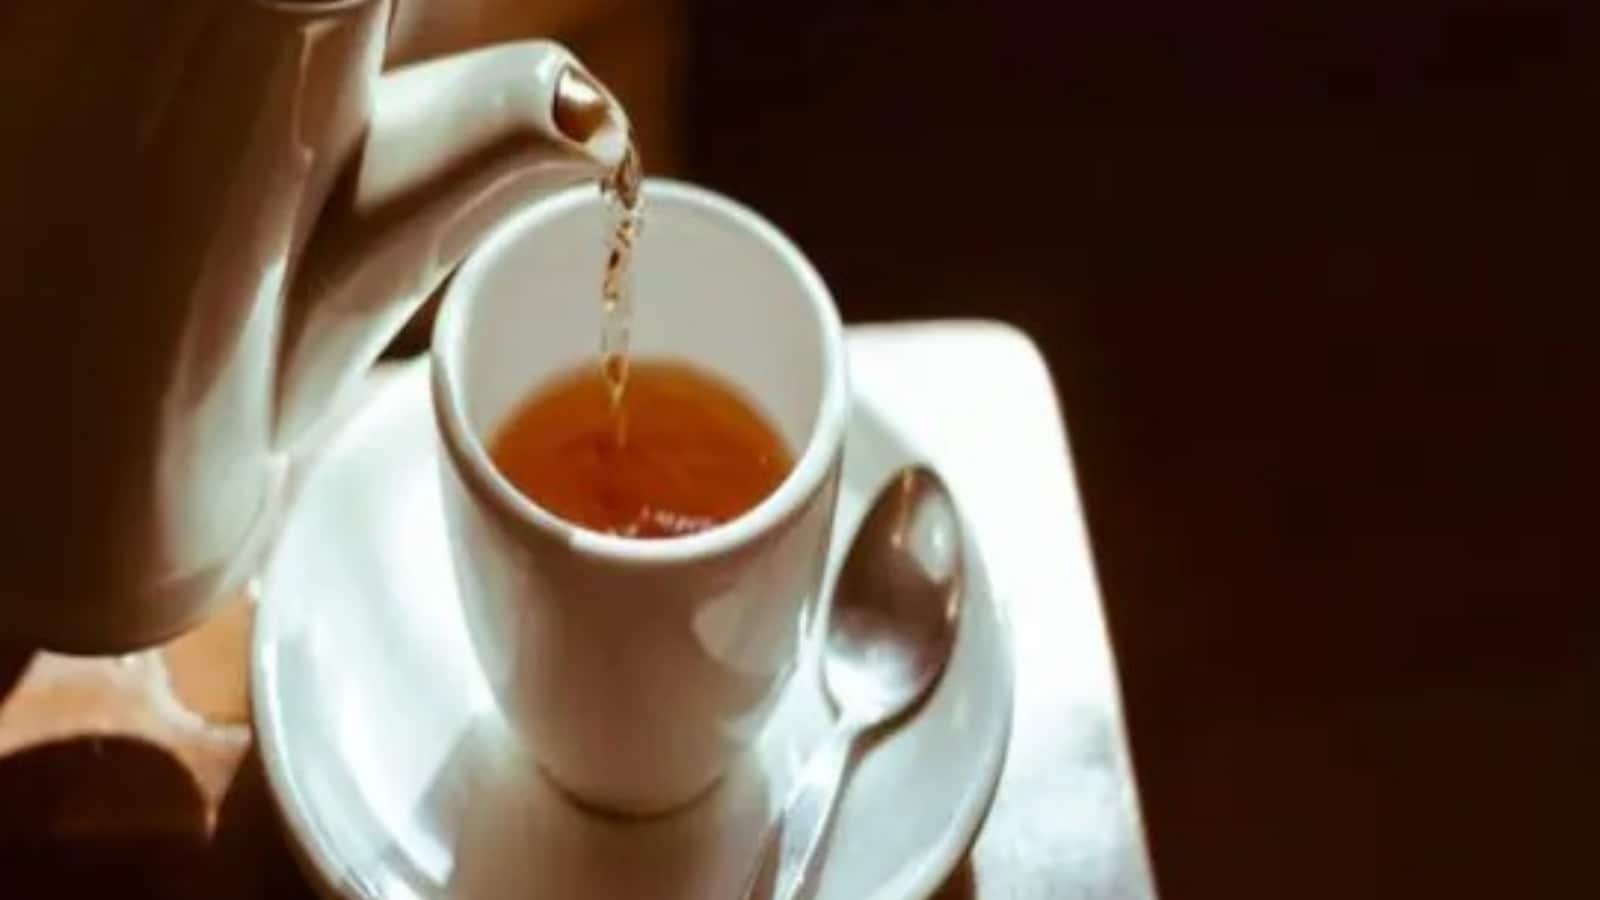 Scientists Reveal The ‘Right Way’ To Pour Tea, Avoid Spillage